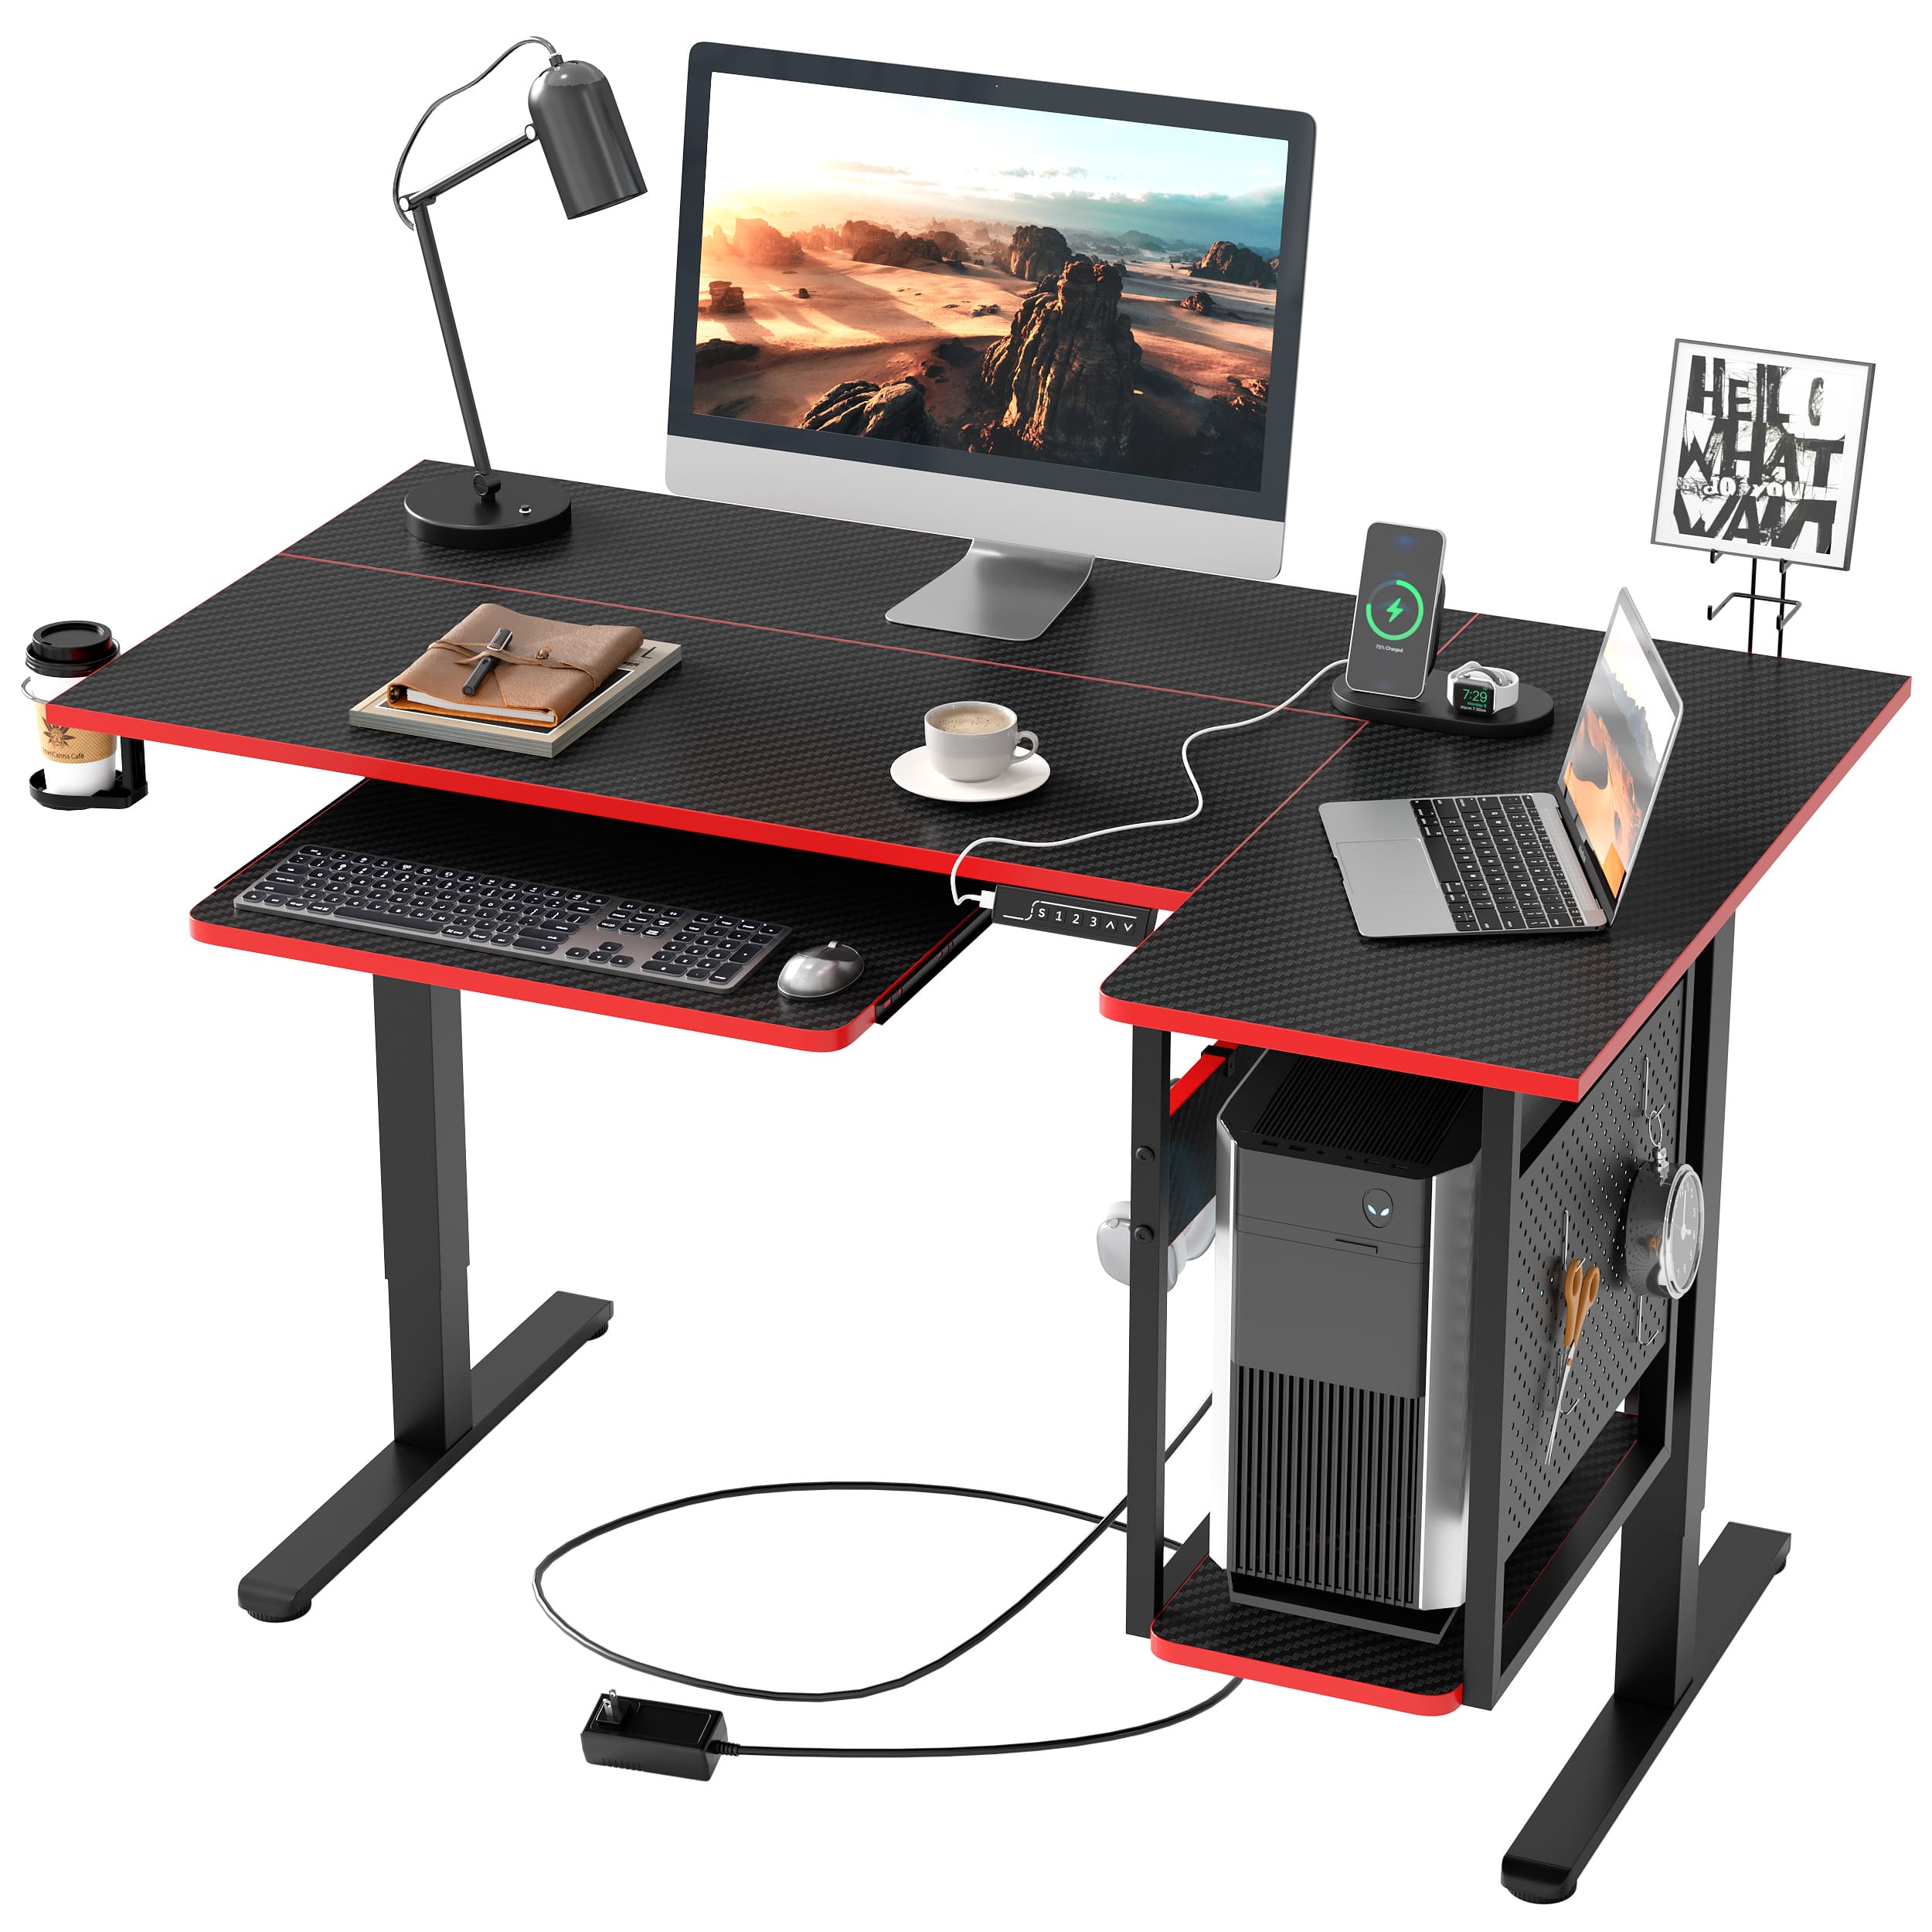 the black standing desk with keyboard tray